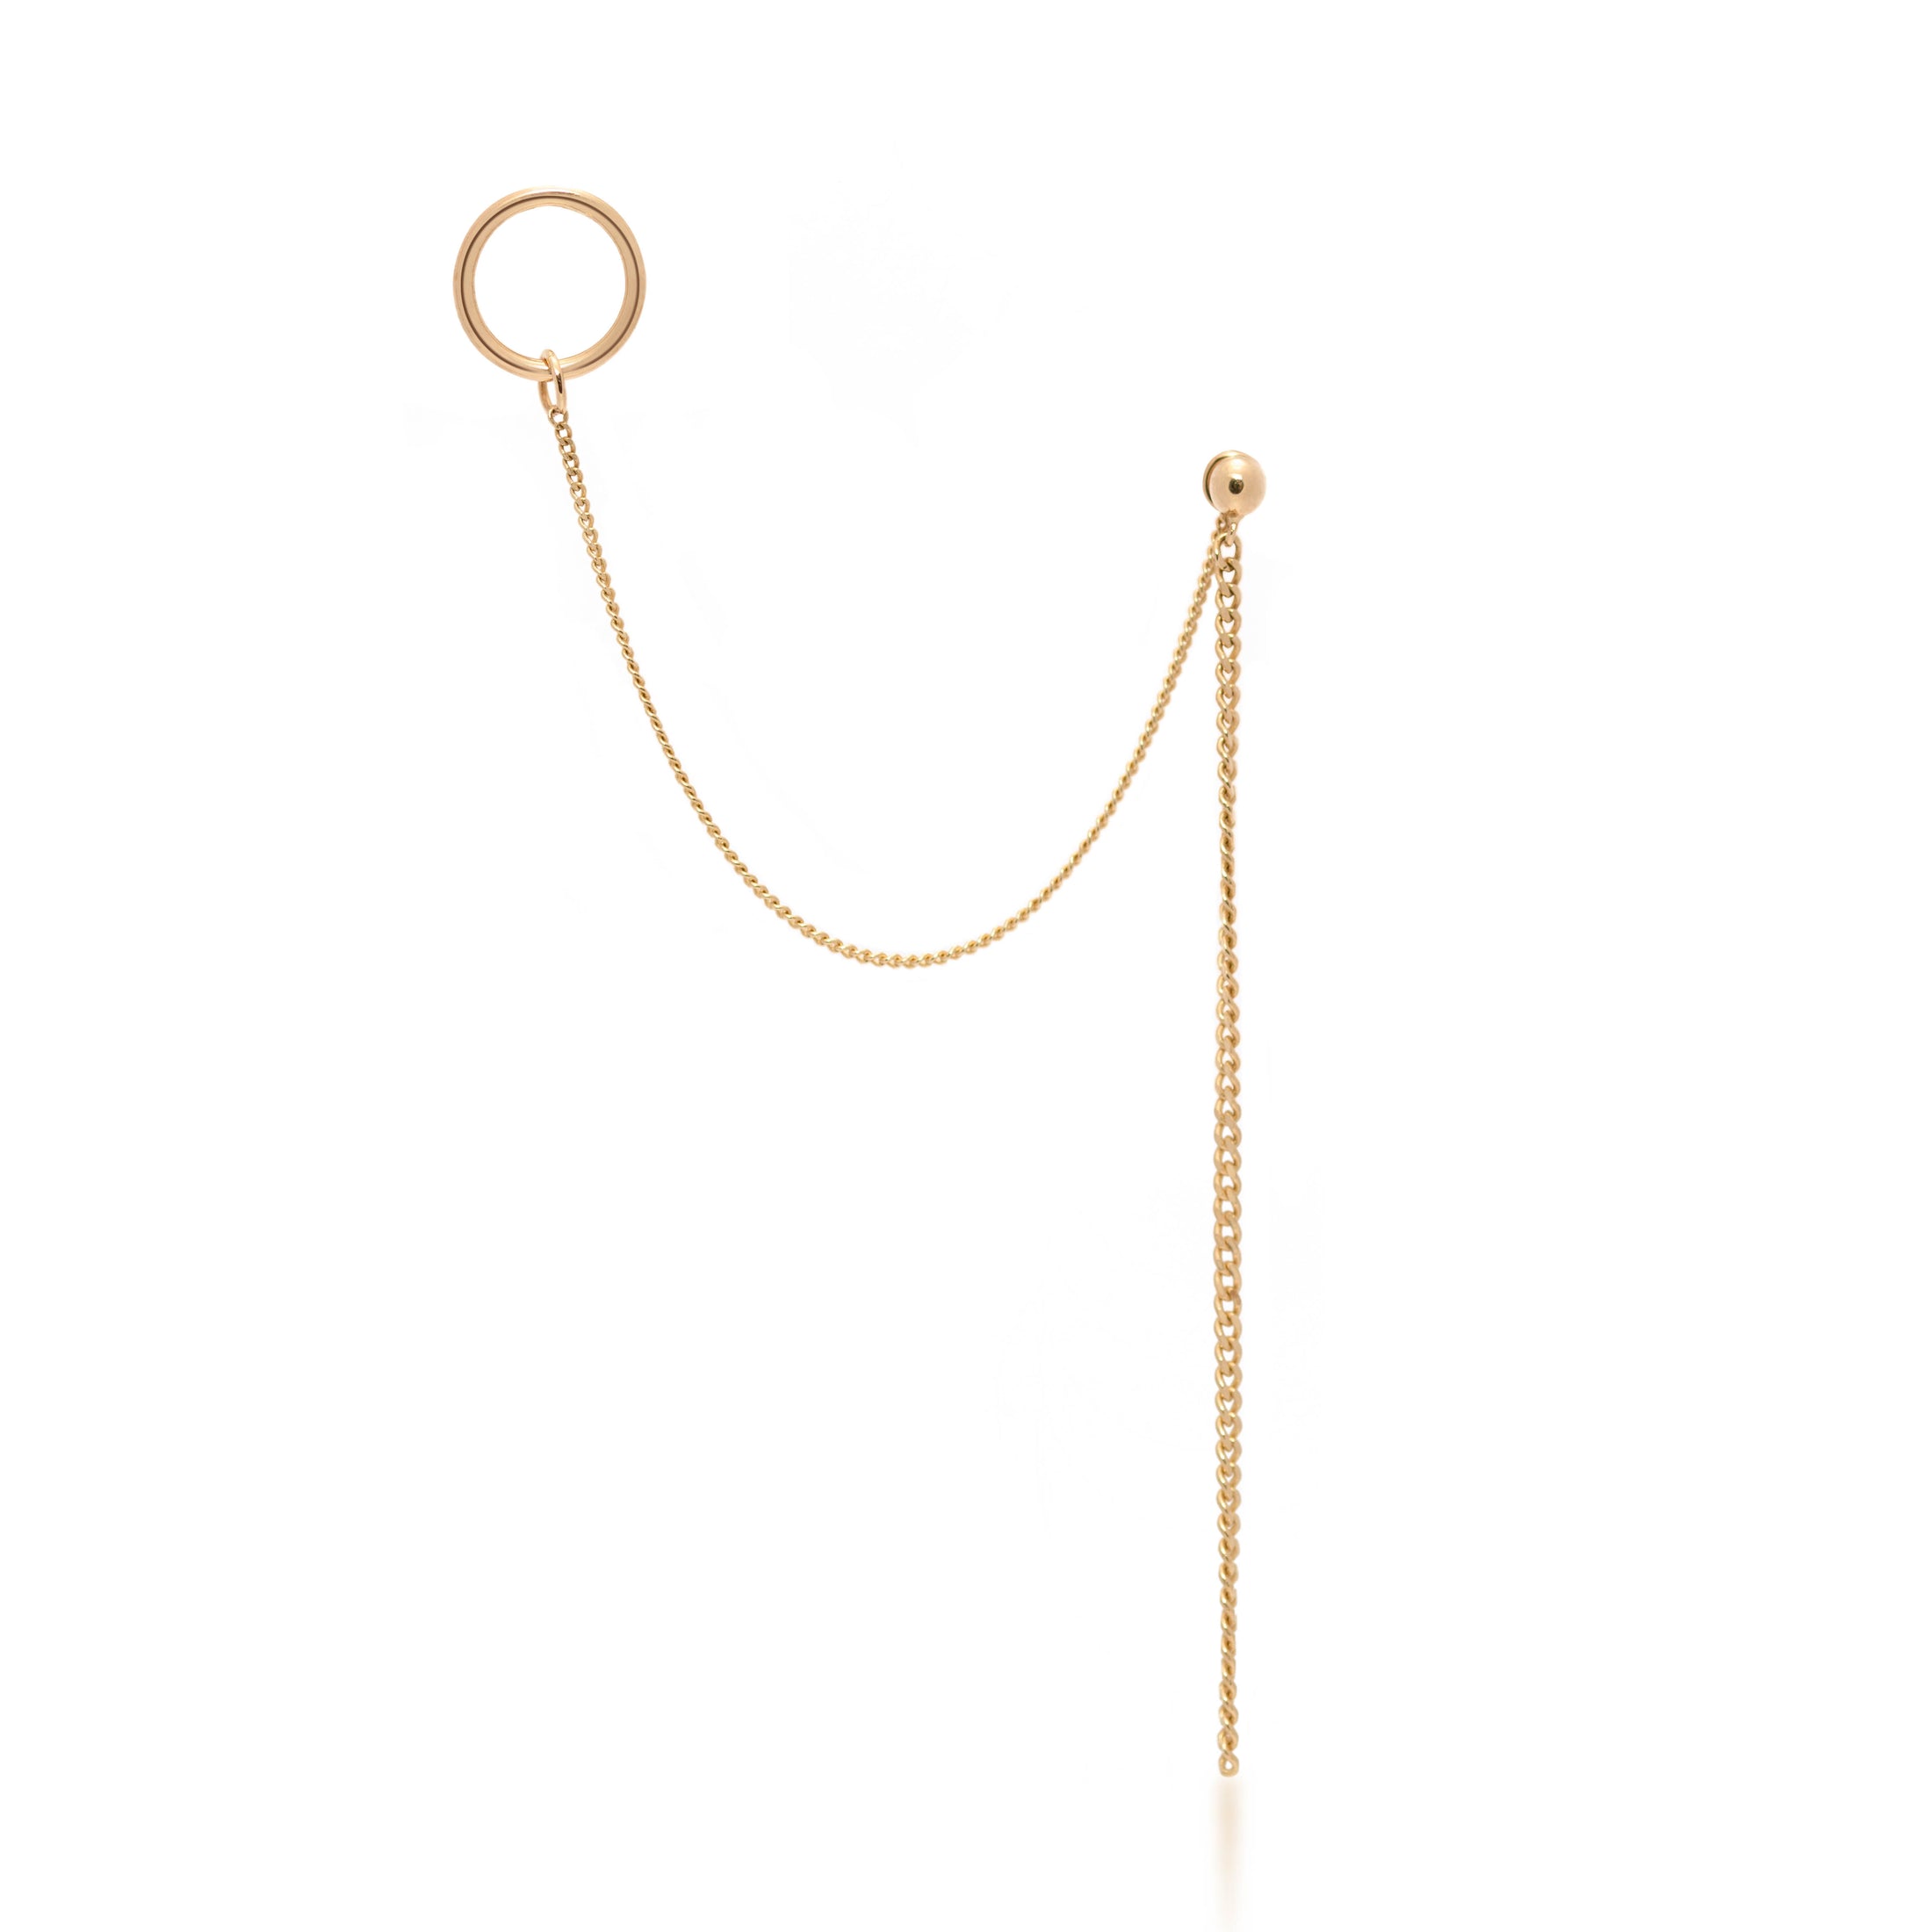 Gold Double Stud Earring | 14K Yellow Solid Gold